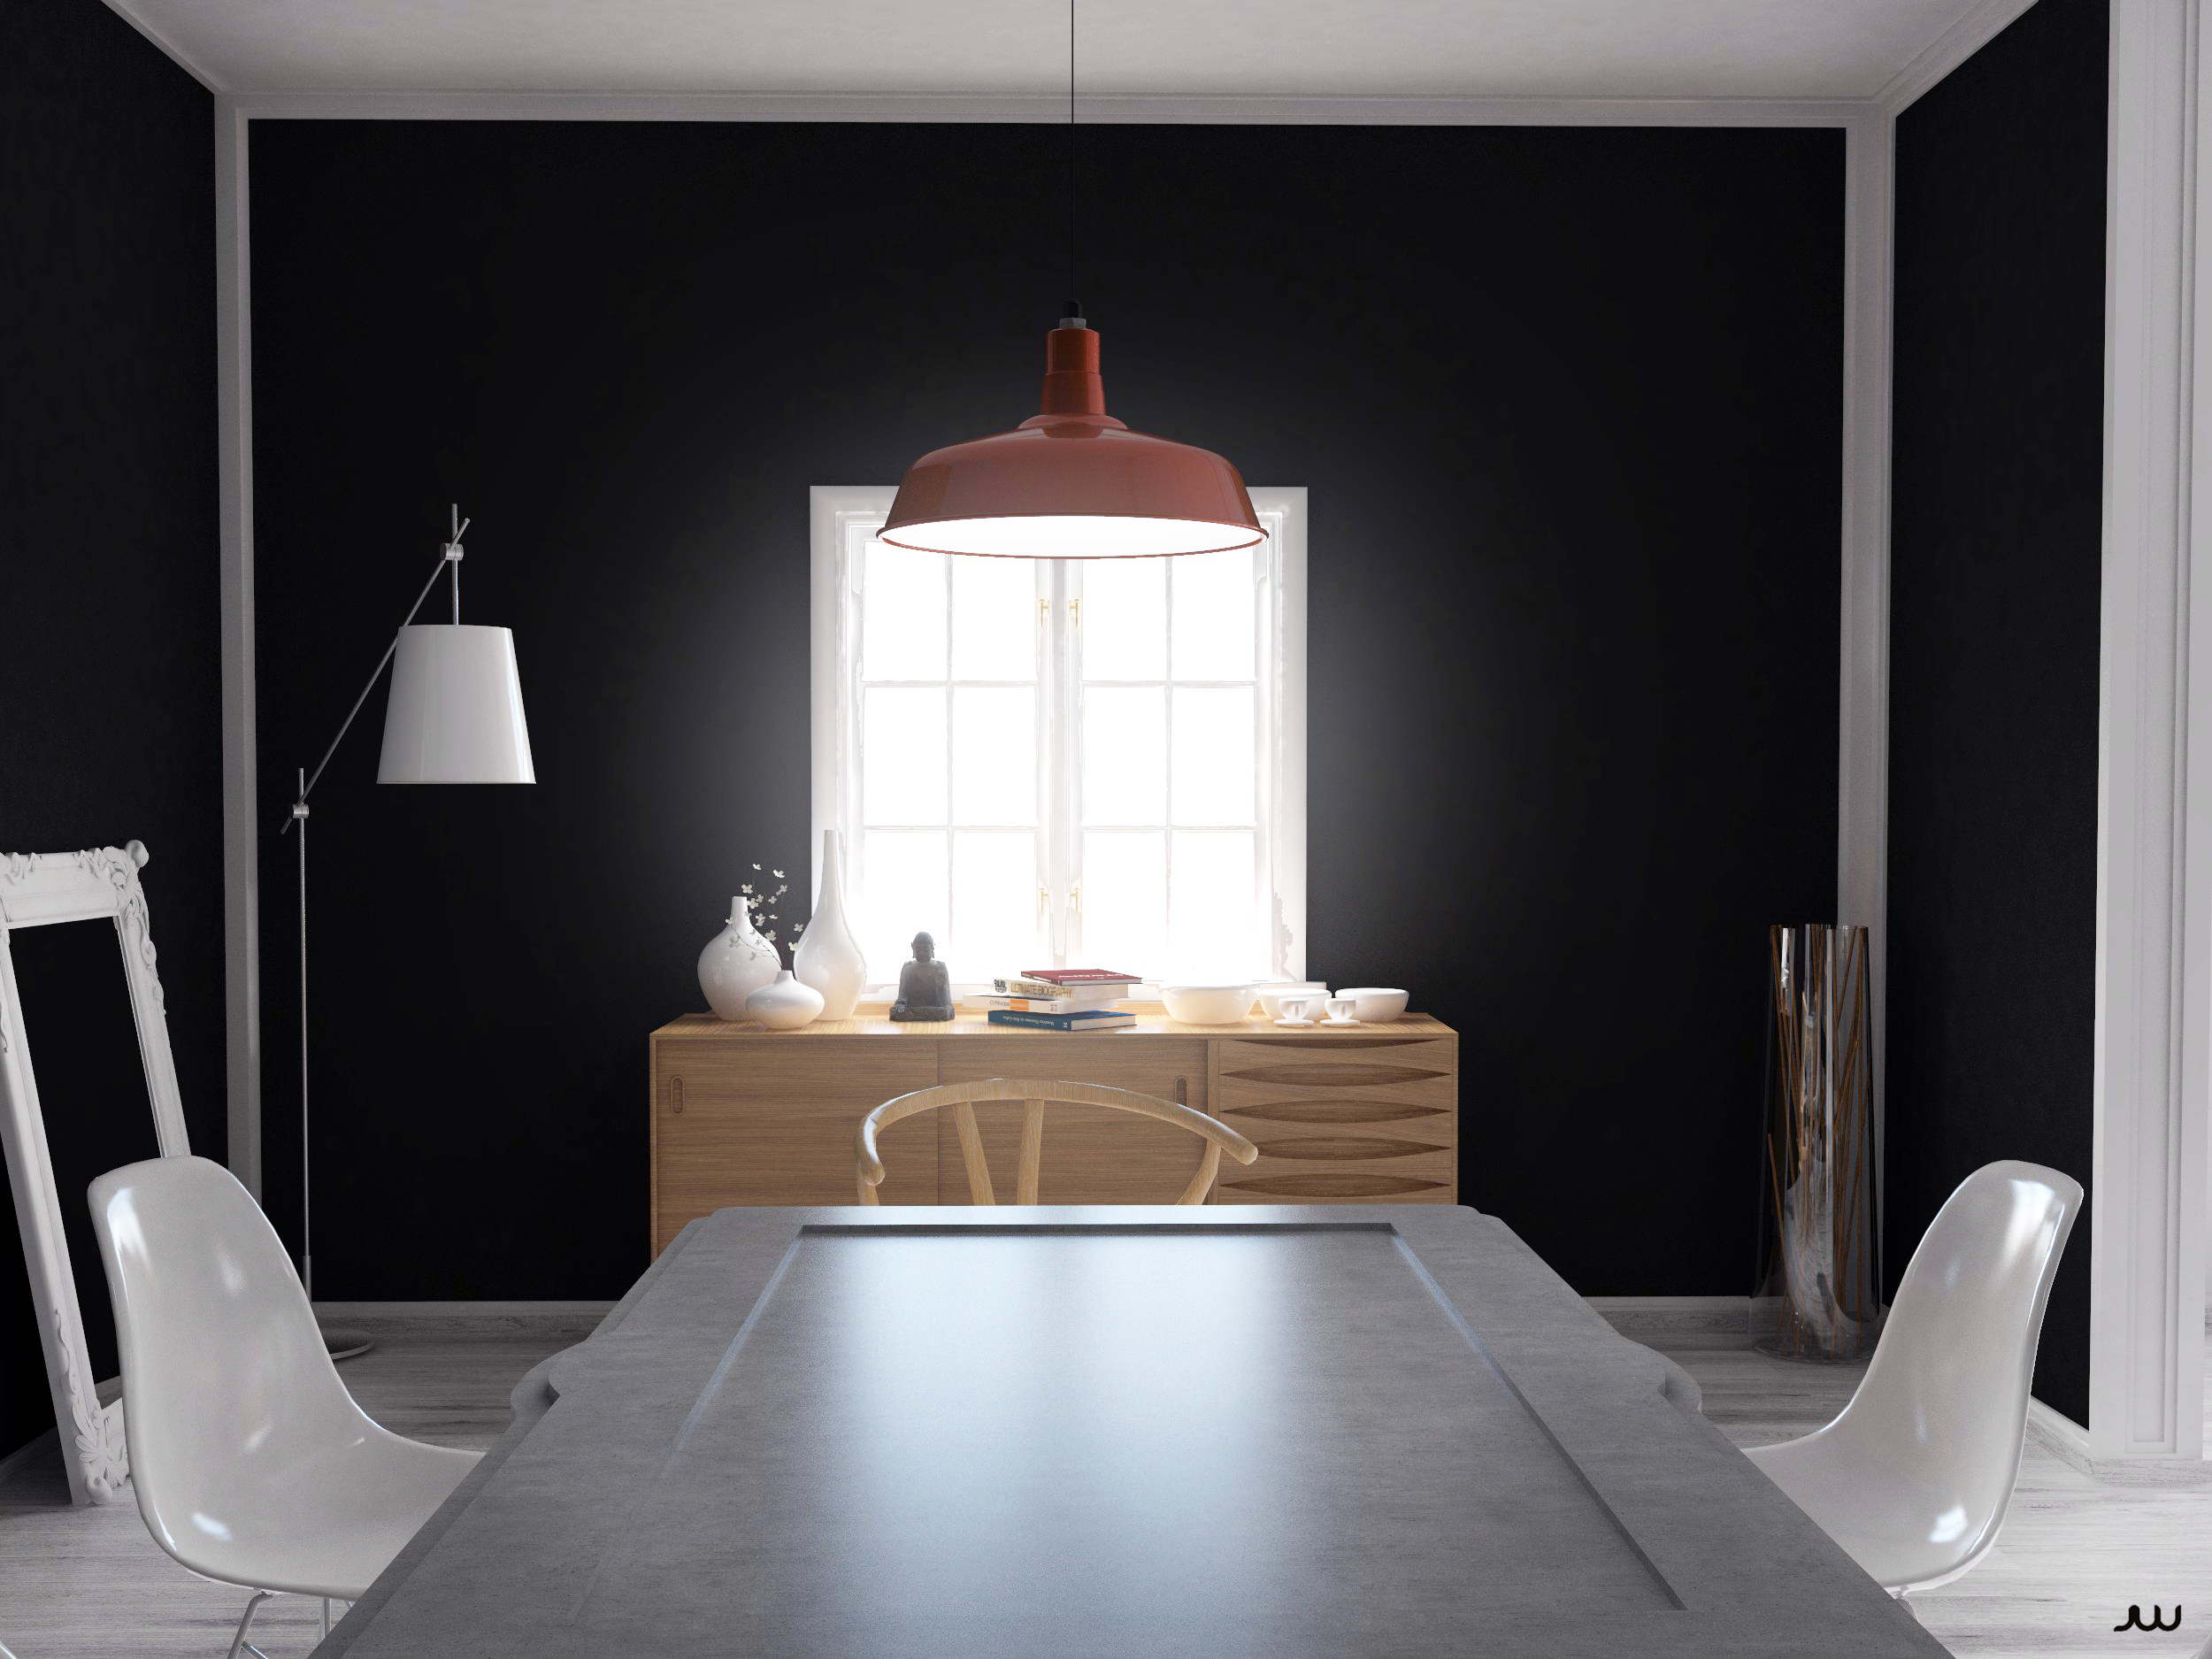 Making of scandinavian interior with Sketchup, Vray and Photoshop